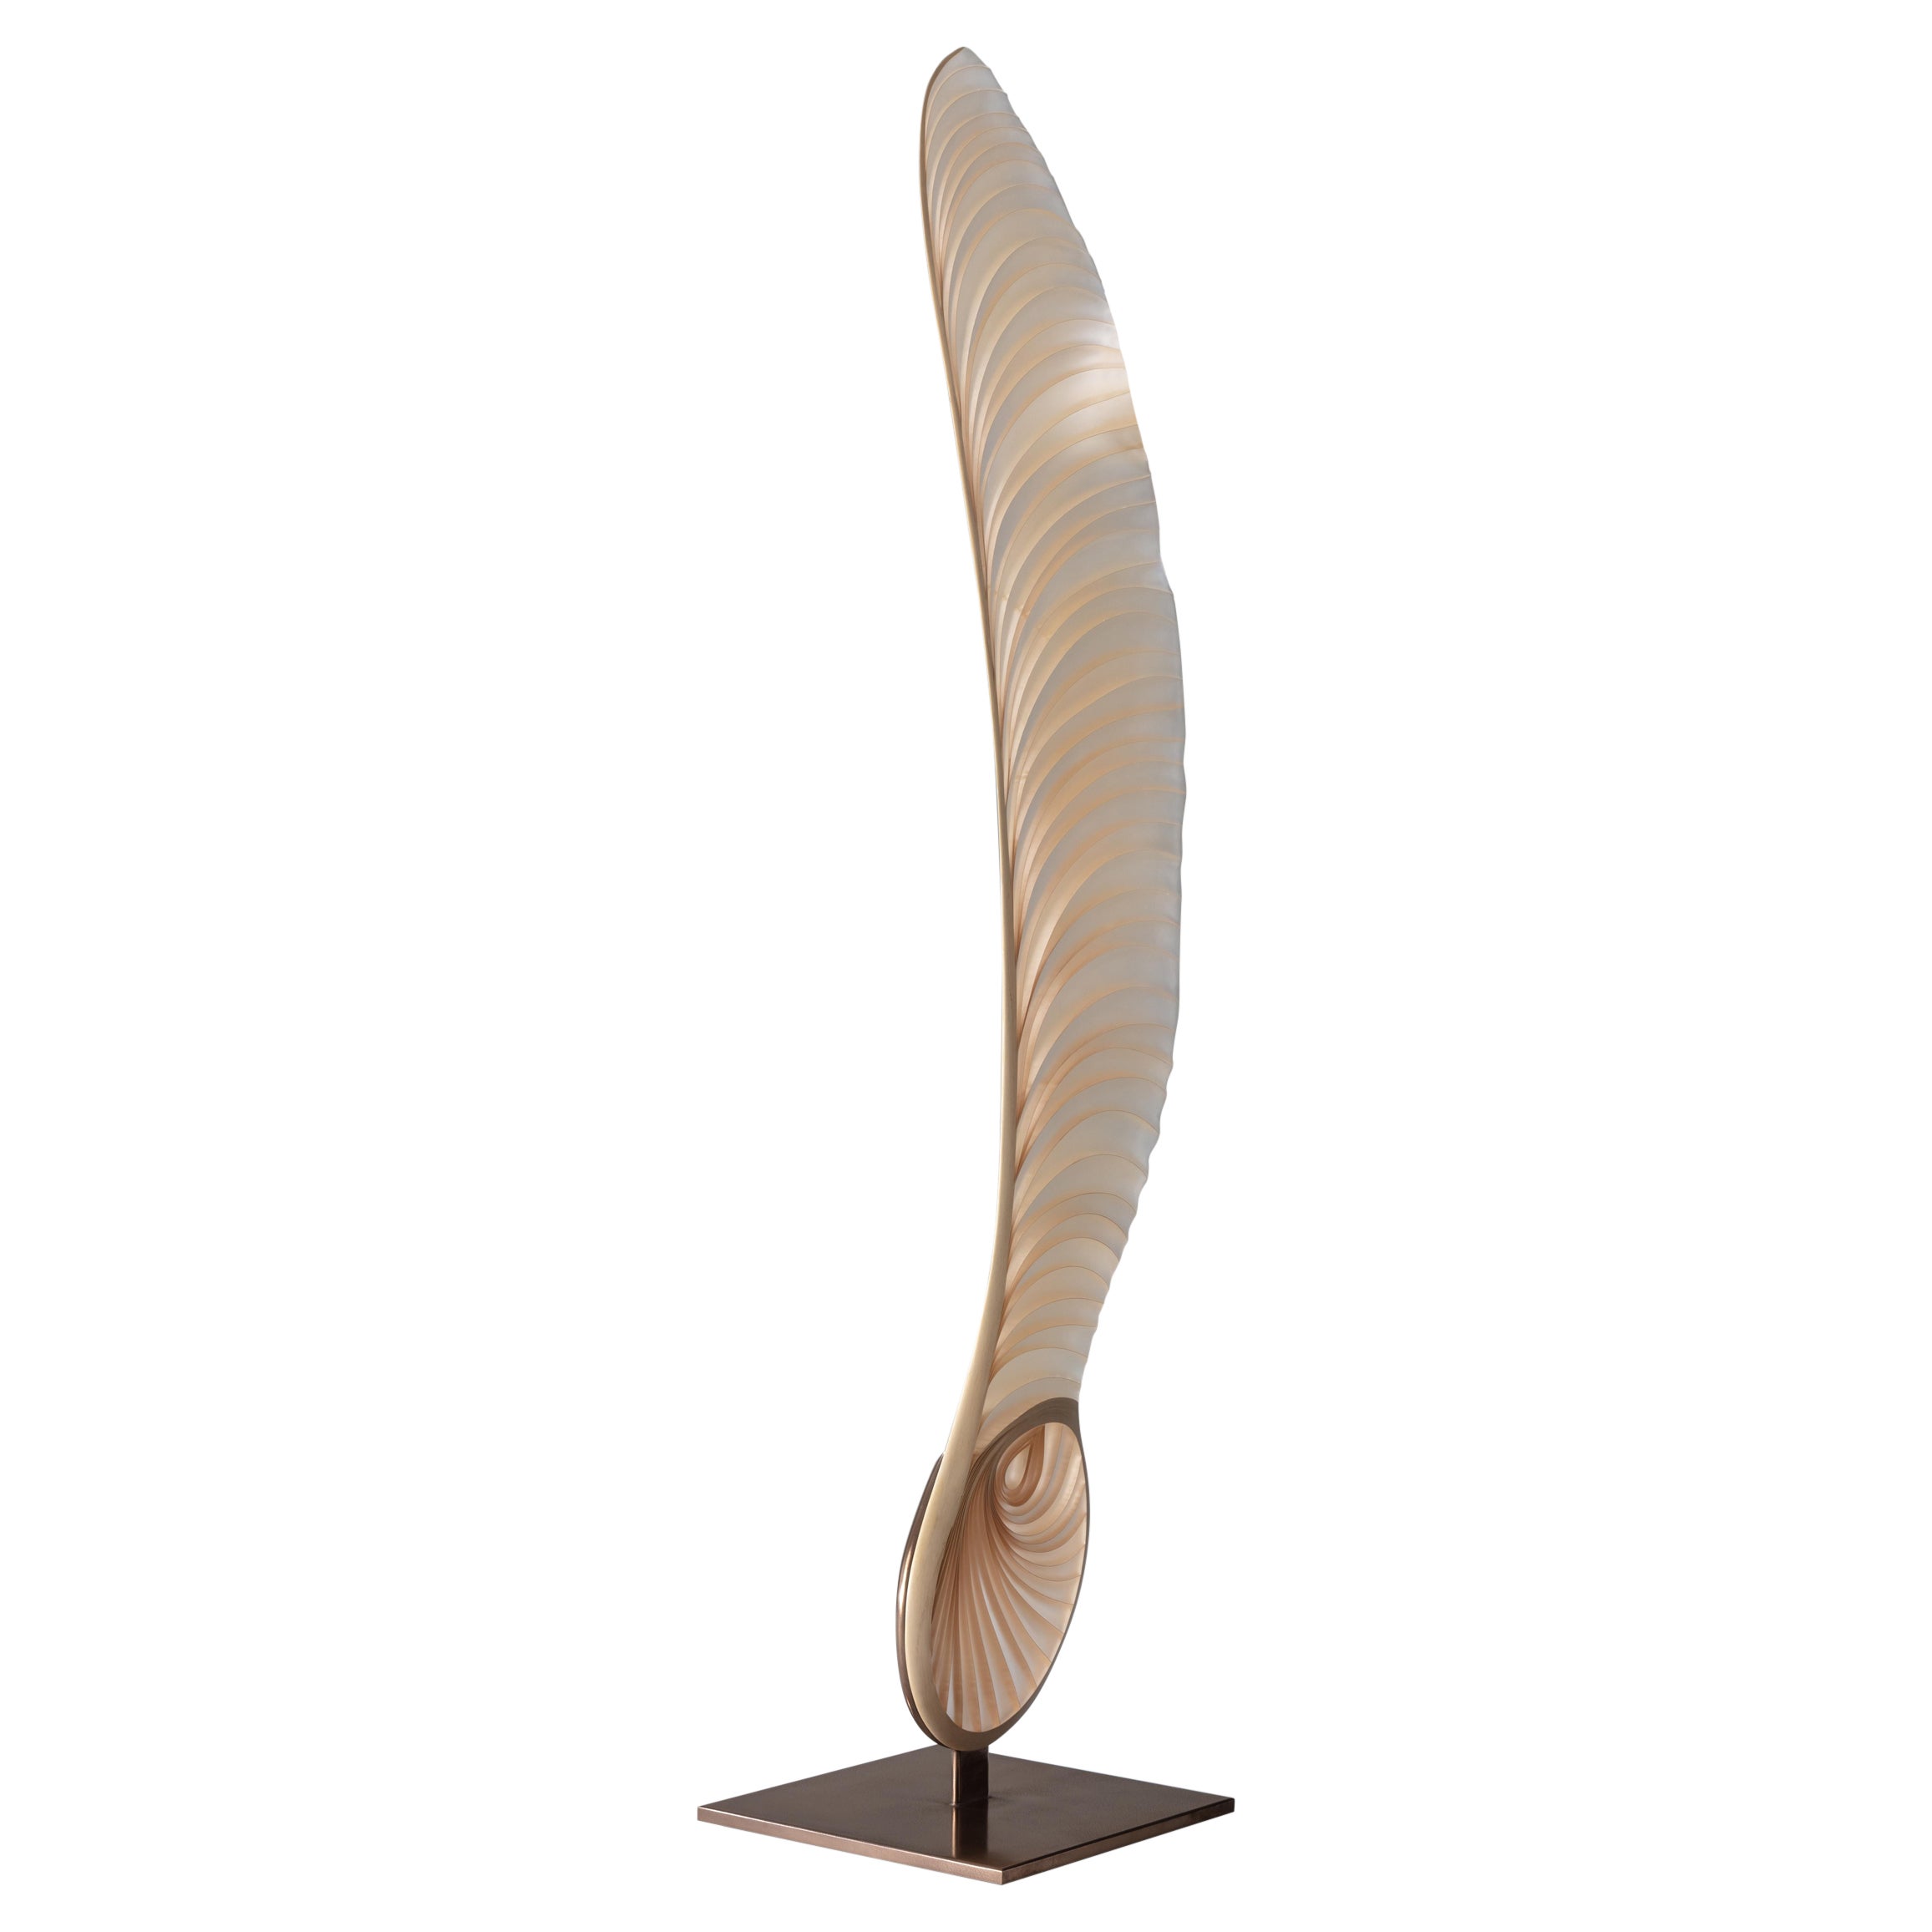 Marc Fish Ethereal Sculptural Sycamore Seed UK 2022 For Sale